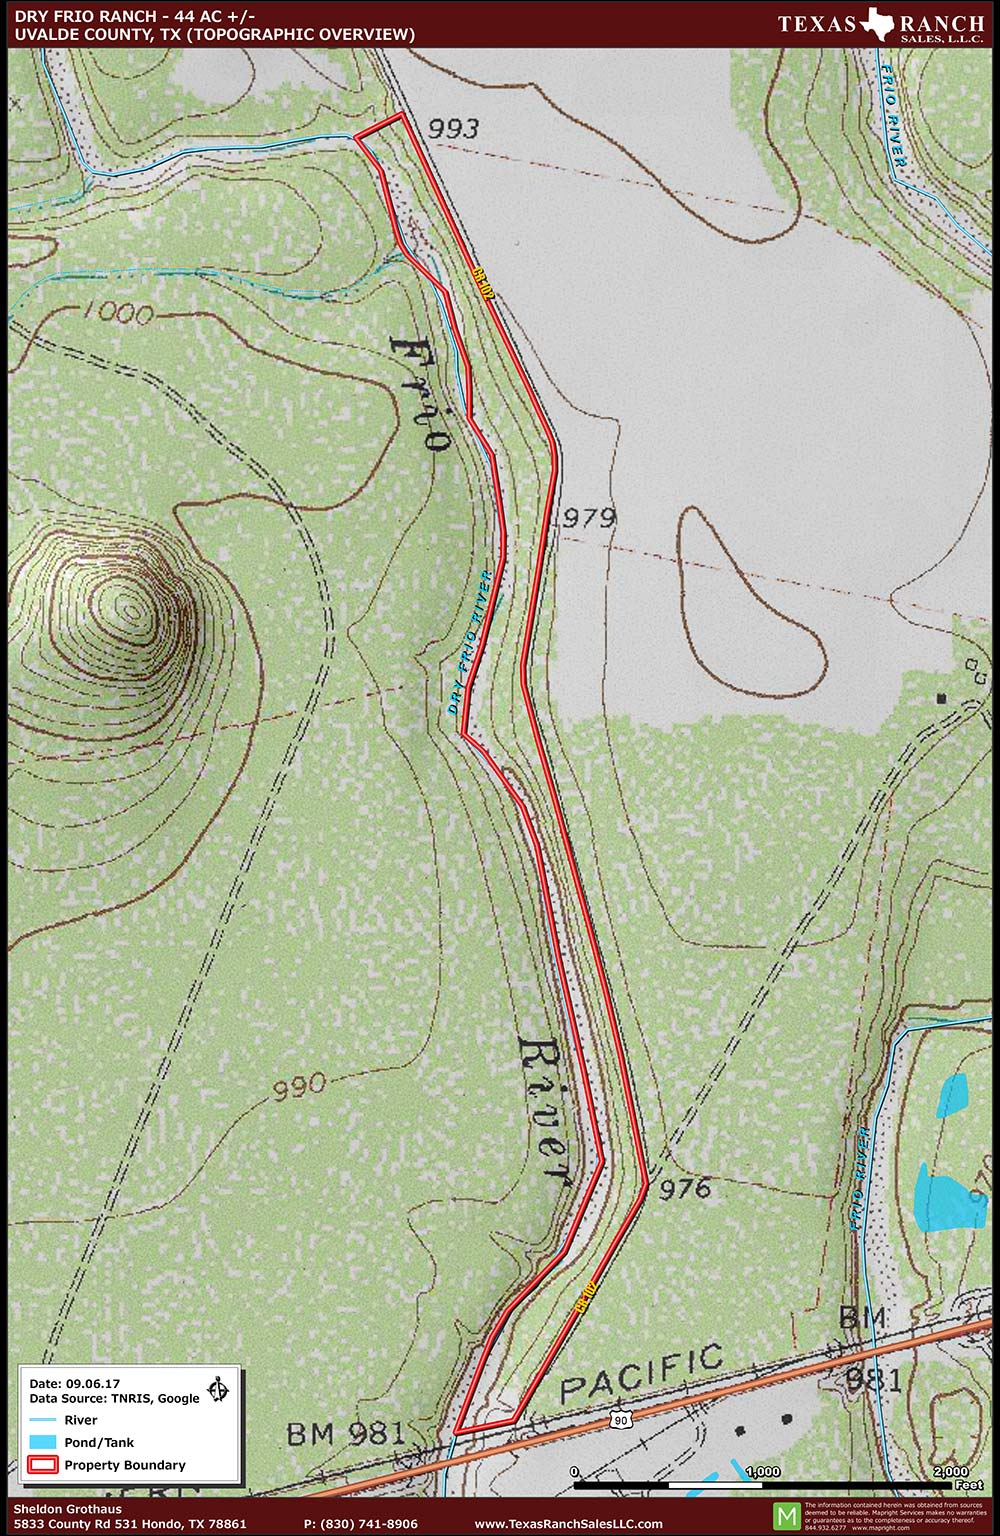 44 Acre Ranch Uvalde Topography Map